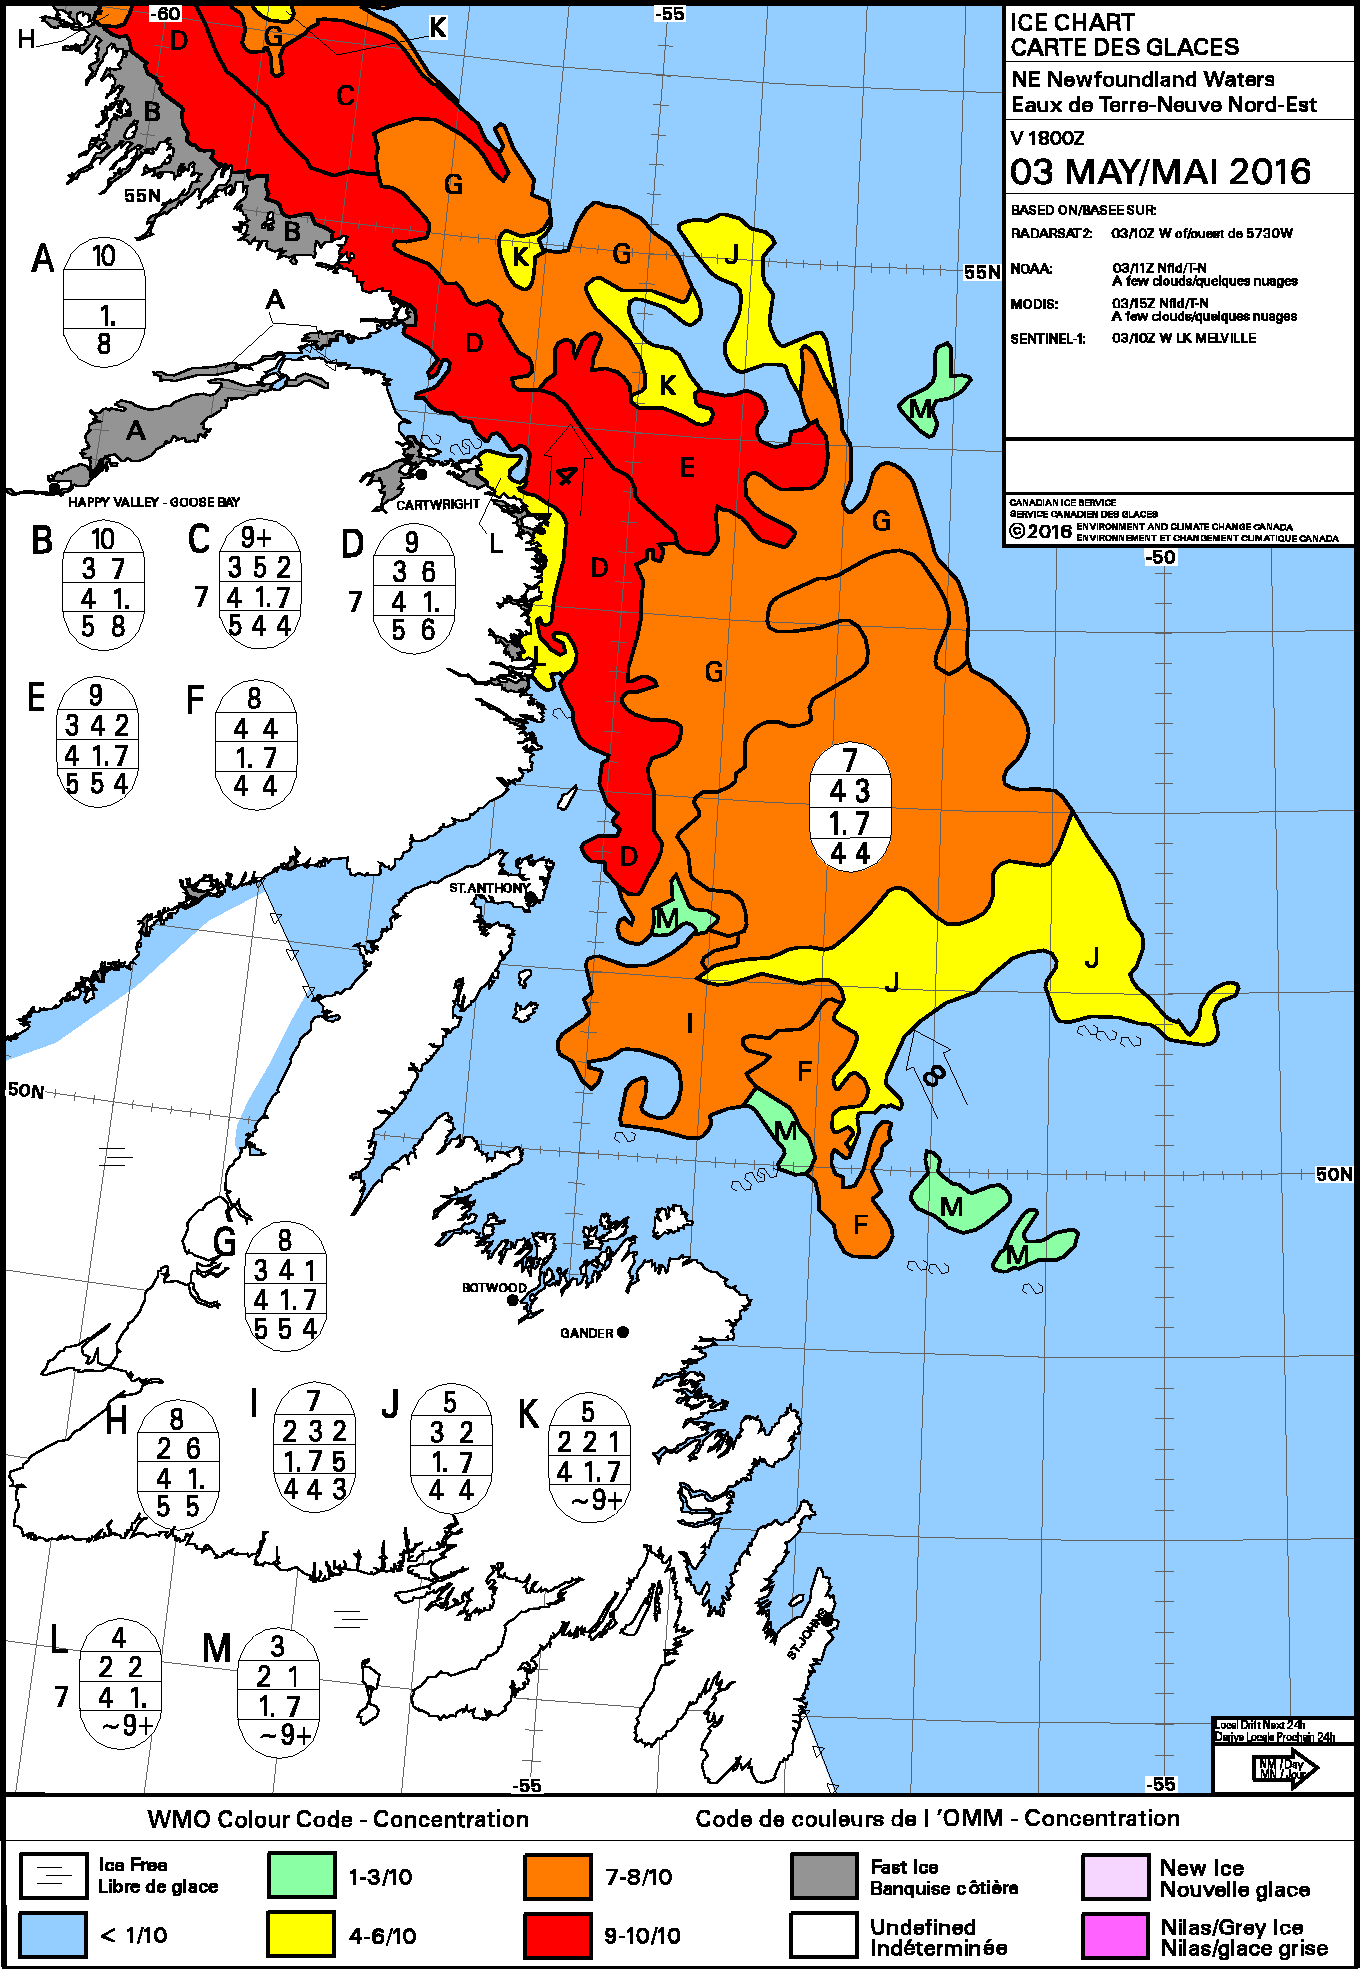 Ice concentration off the coast of Labrador and Newfoundland [click to enlarge]